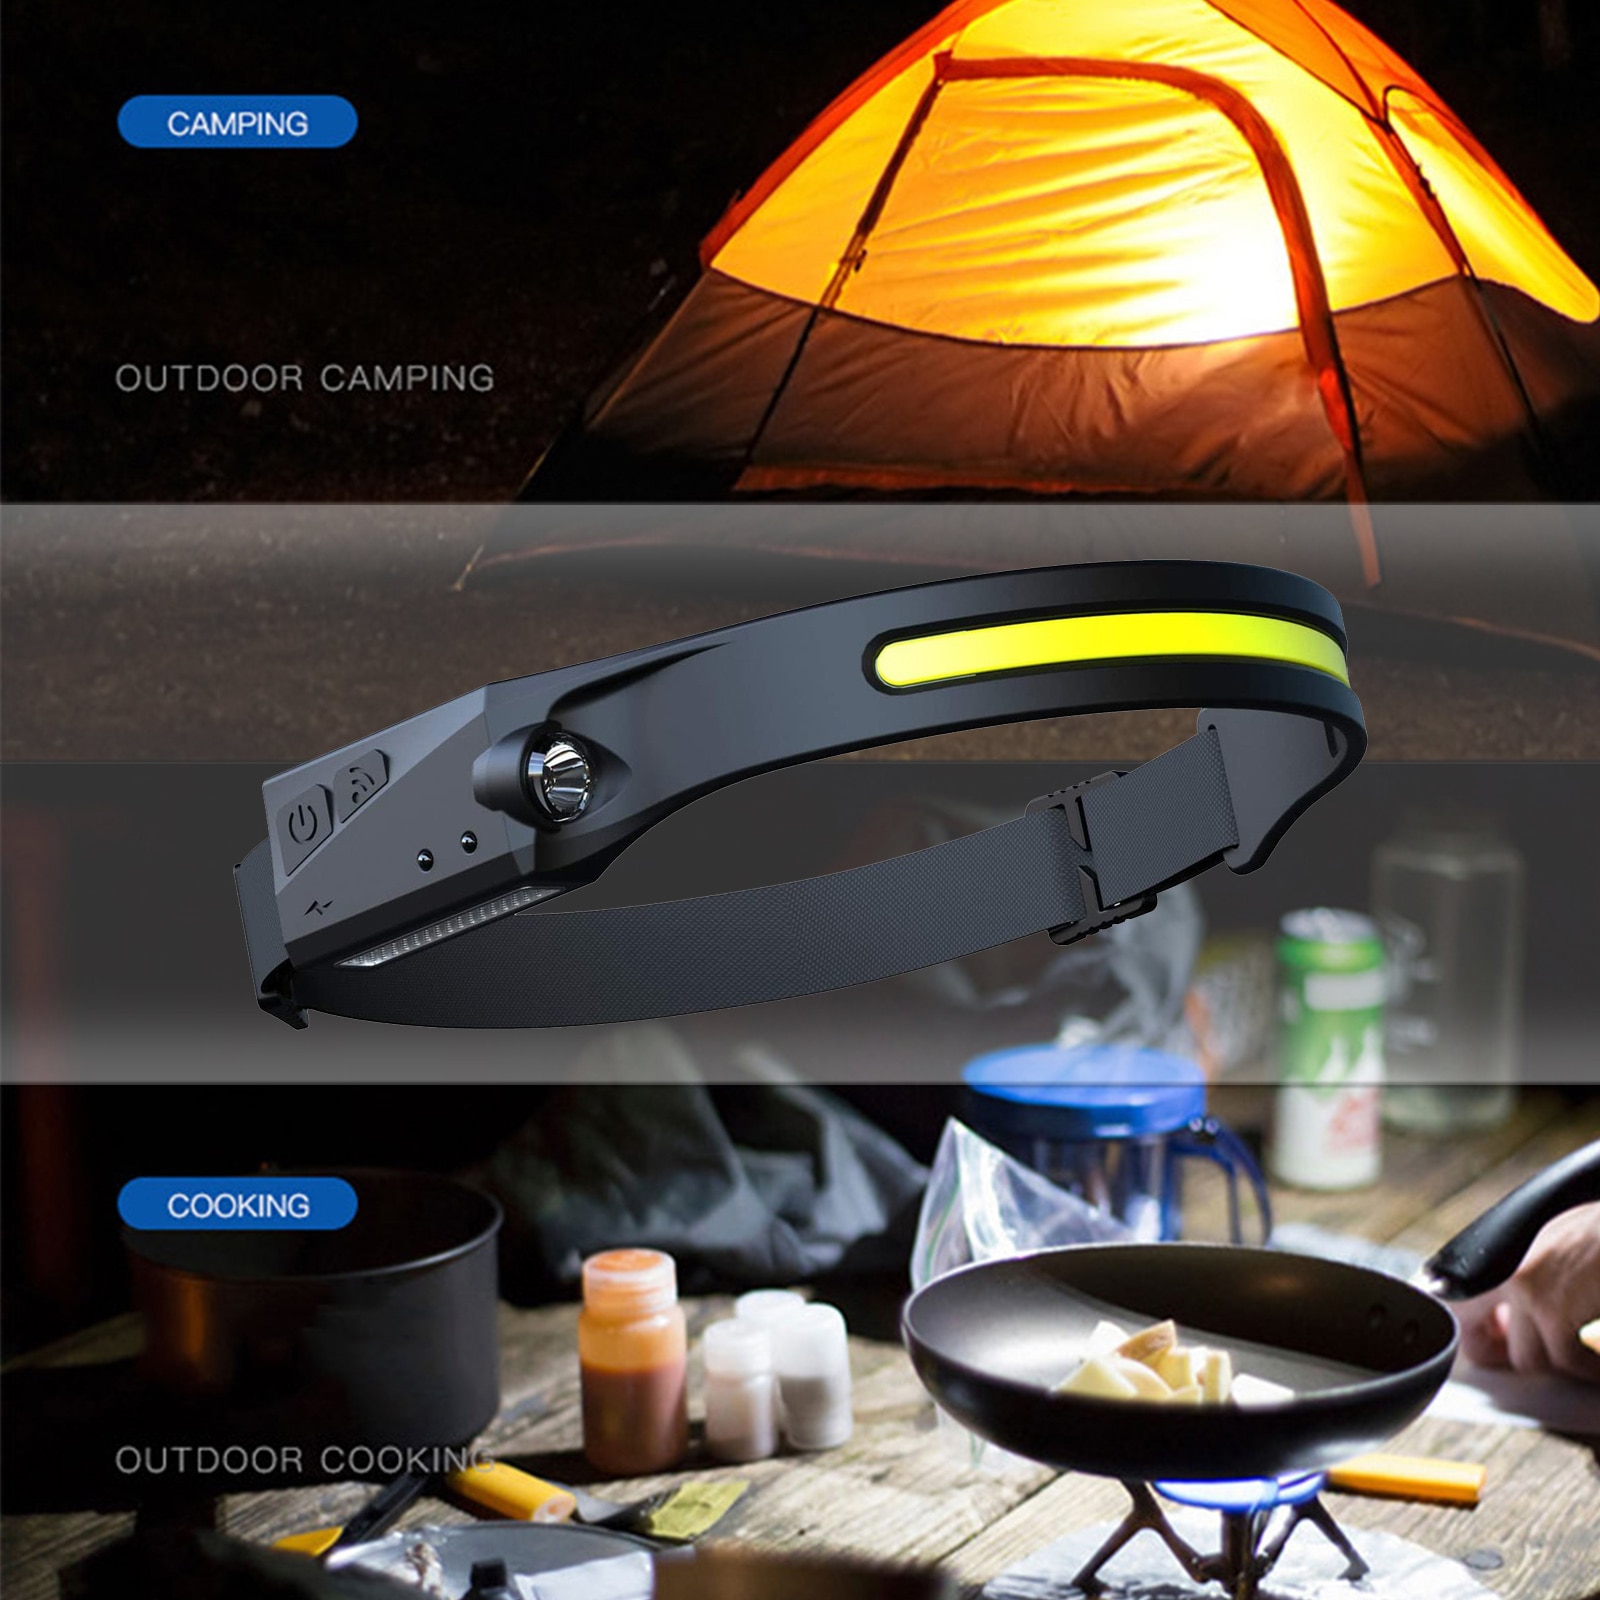 Powerful Headlamps COB LED Flashlight Waterproof 4 Modes USB Warning Headlight Torch for Cycling Camping Working Outdoor Fishing